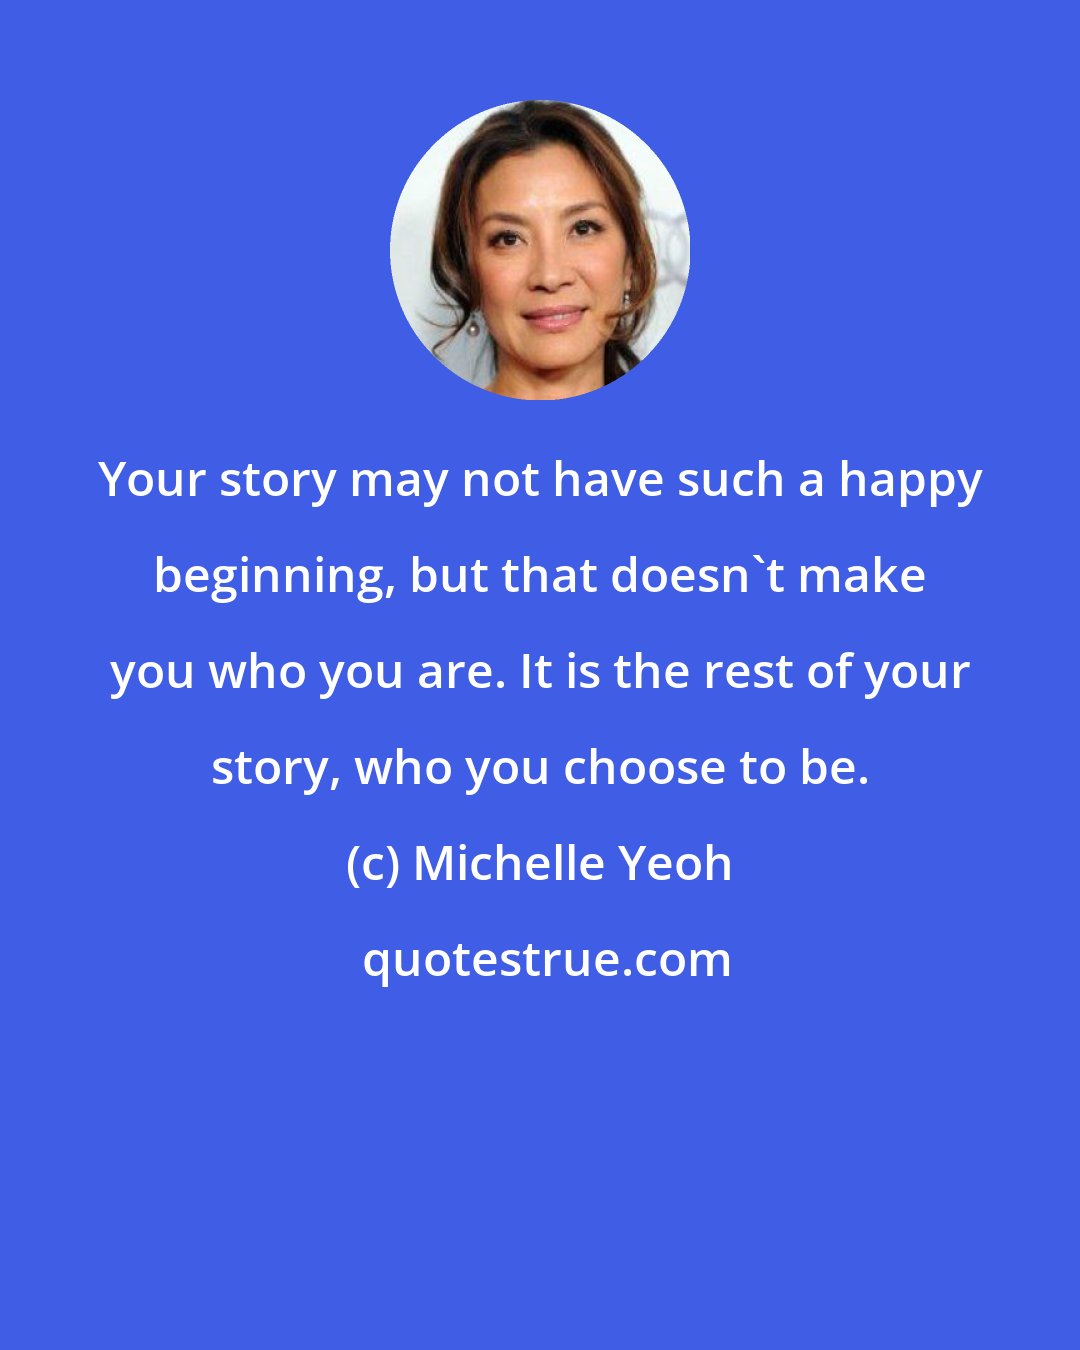 Michelle Yeoh: Your story may not have such a happy beginning, but that doesn't make you who you are. It is the rest of your story, who you choose to be.